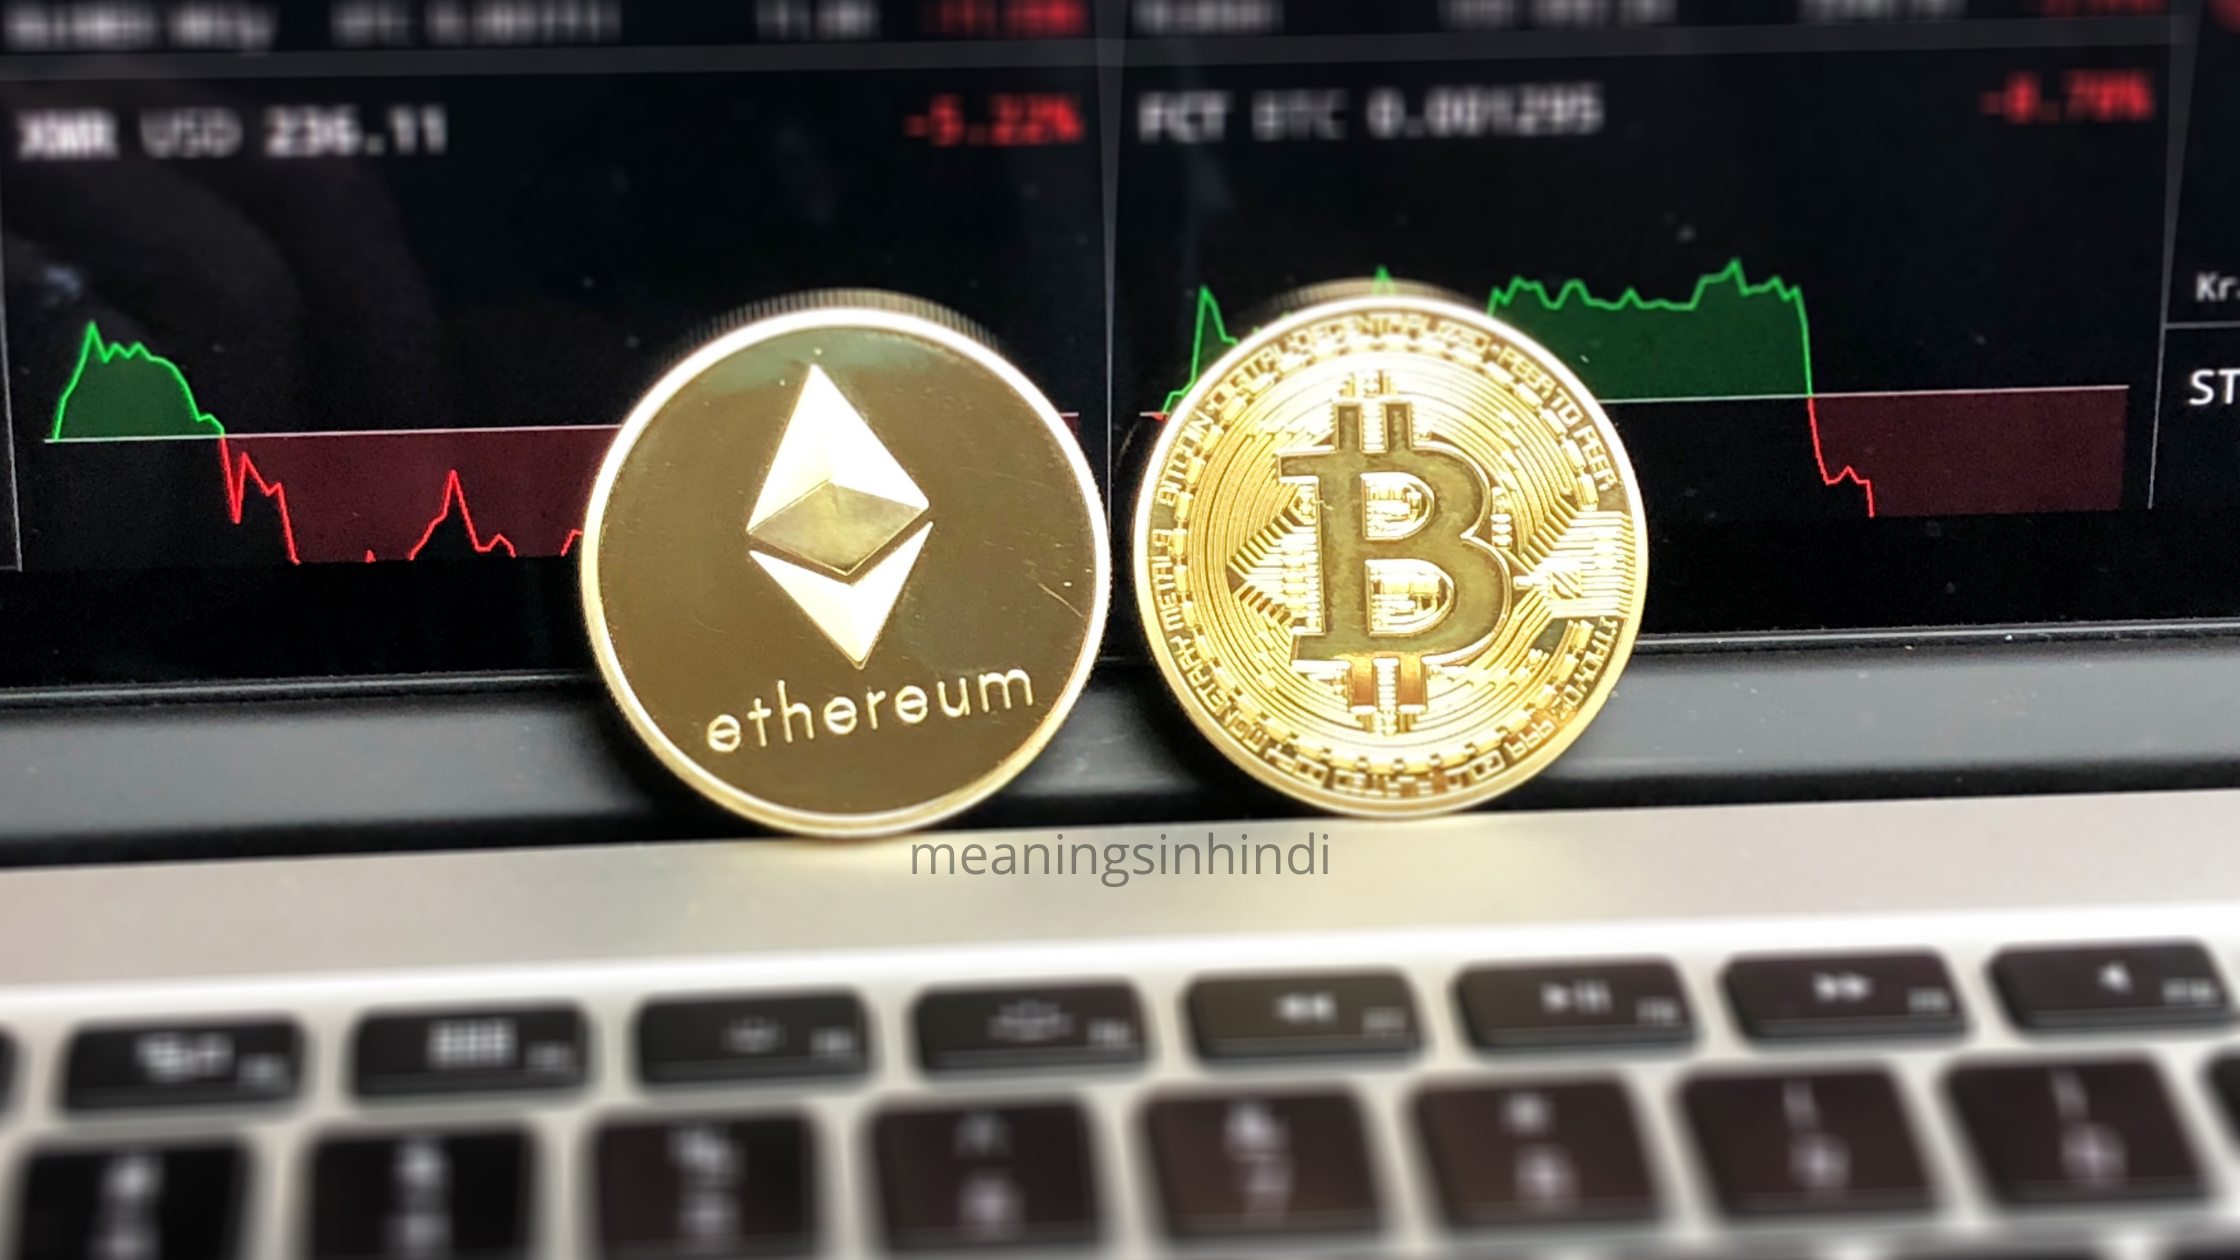 HOW TO GET STARTED WITH CRYPTOCURRENCY